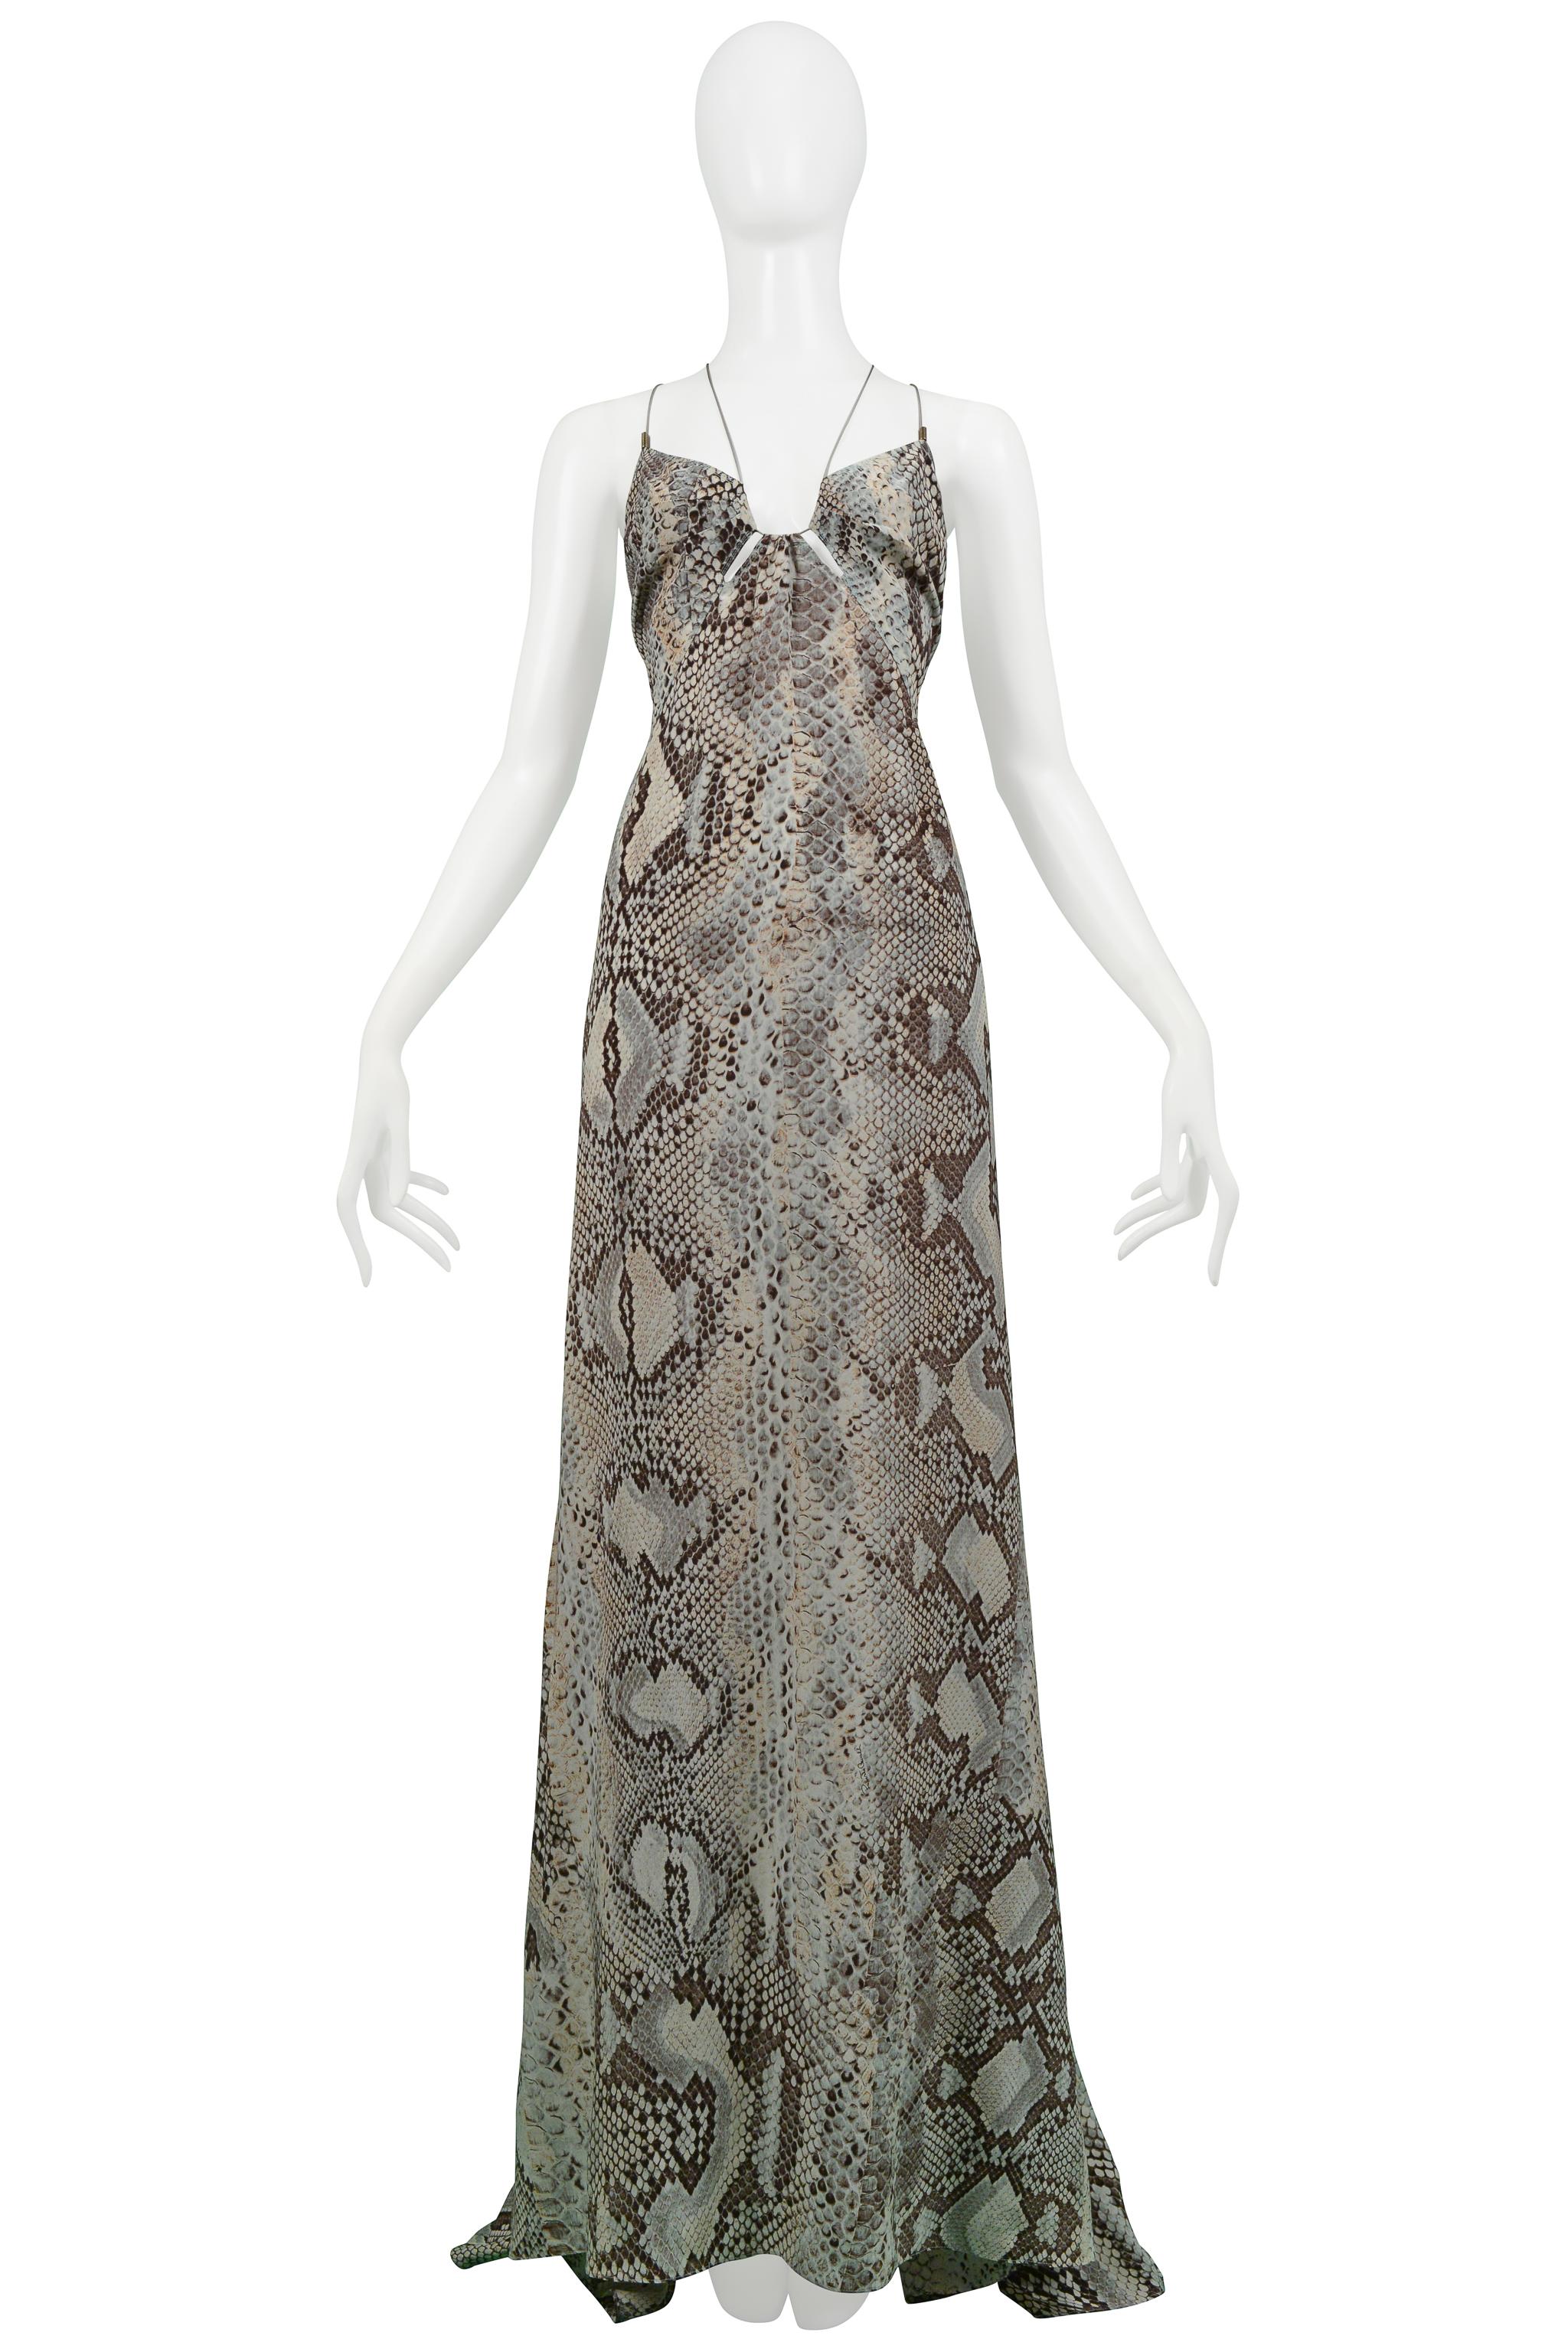 Resurrection Vintage is excited to present a vintage Roberto Cavalli blue and grey tone snake print silk evening gown featuring a cutout front bodice, cantilevered blue ties with silver spring hardware, lace up corset sides, exposed back, center